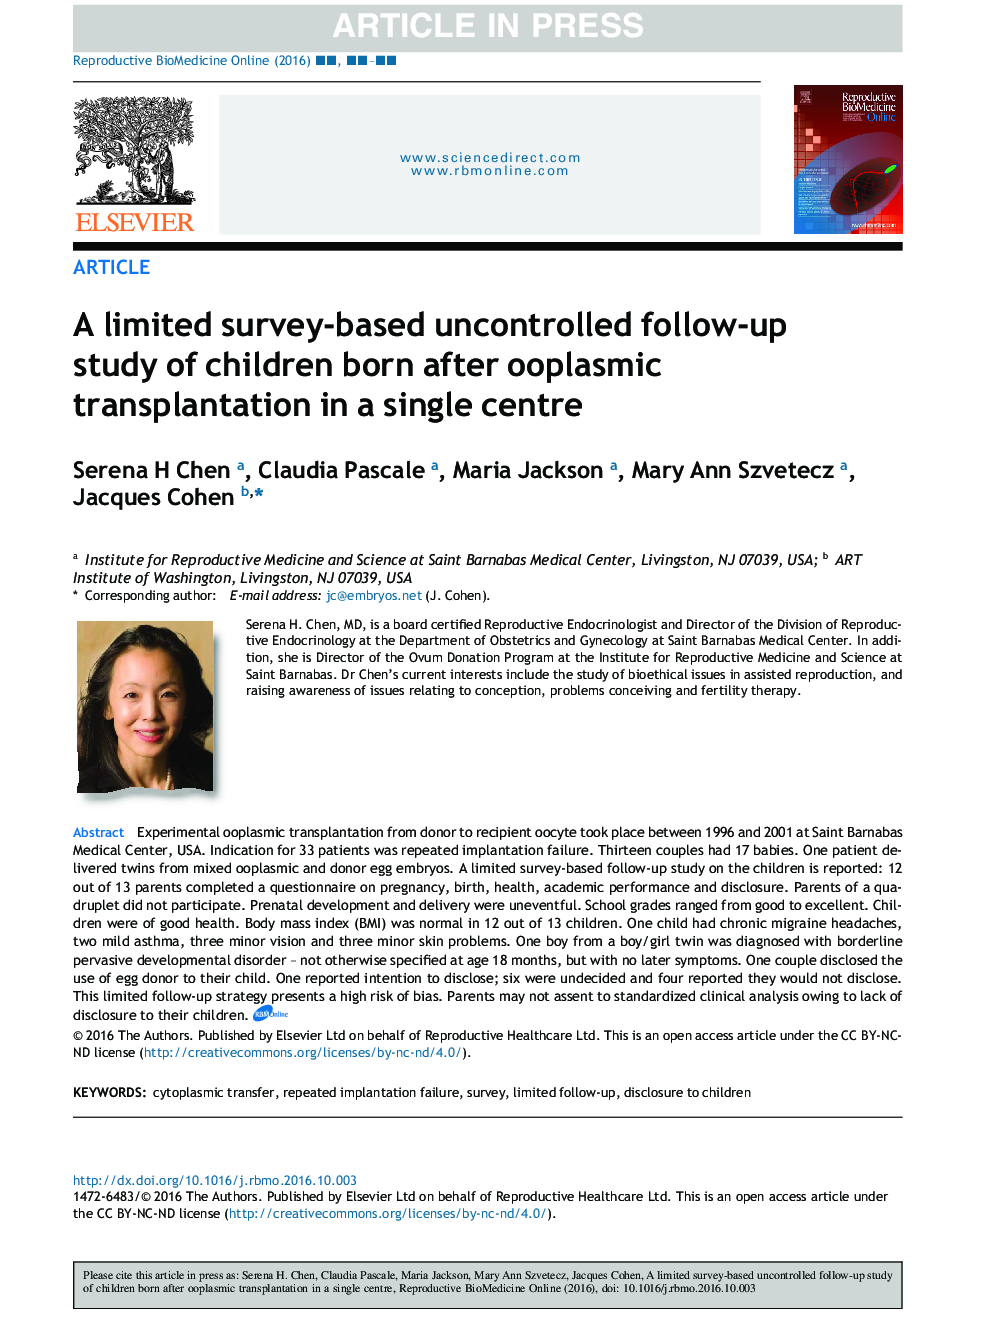 A limited survey-based uncontrolled follow-up study of children born after ooplasmic transplantation in a single centre